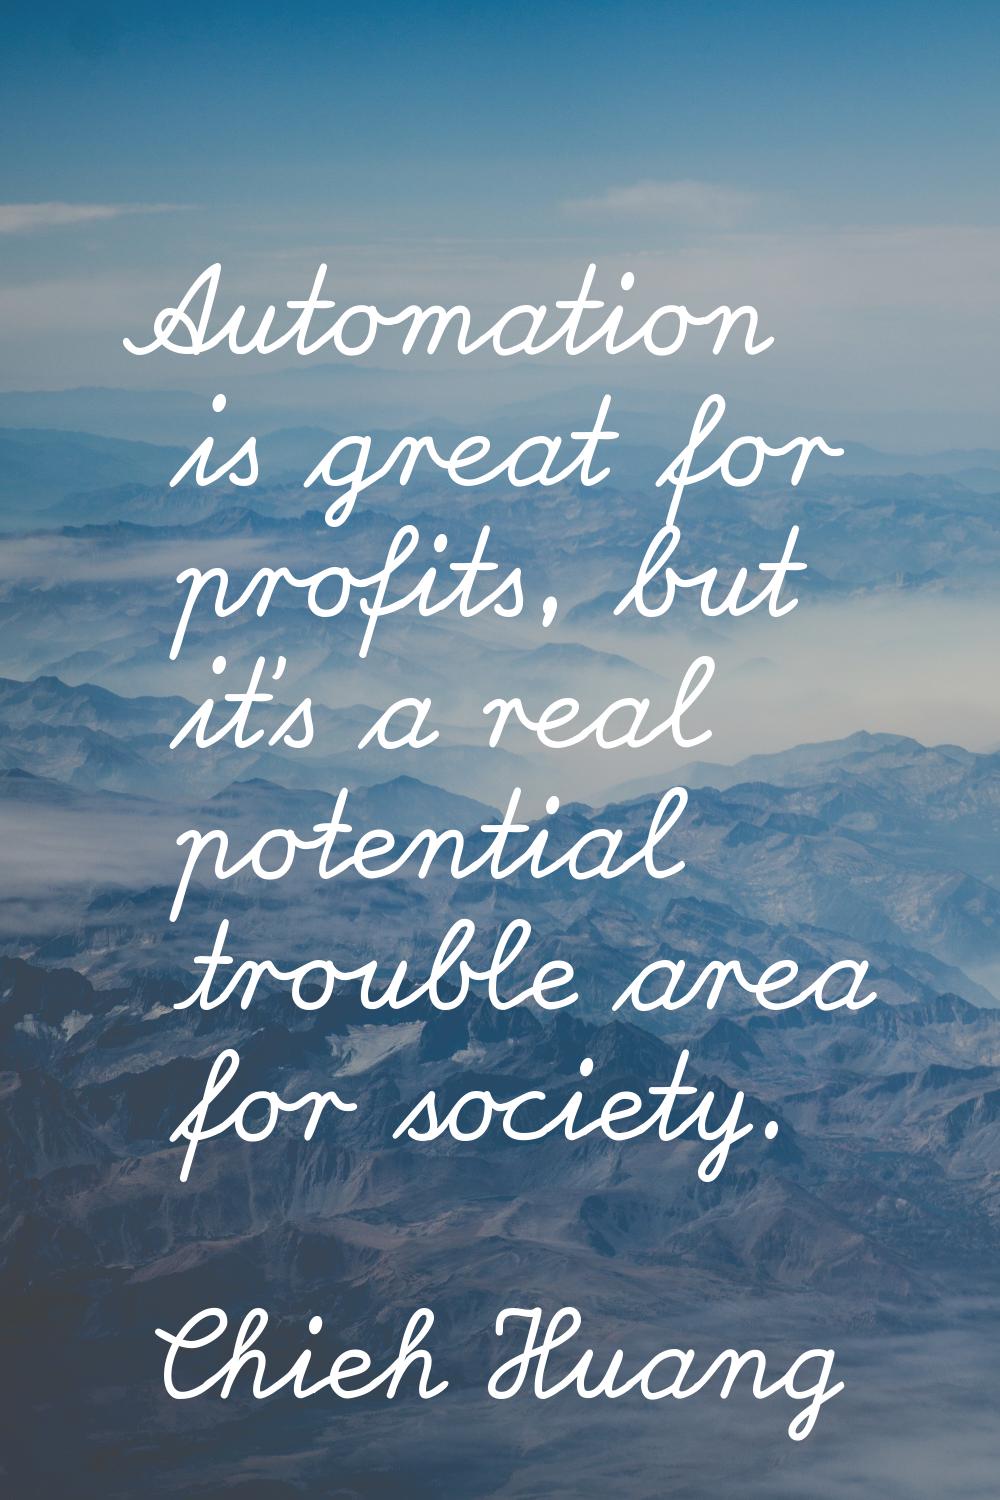 Automation is great for profits, but it's a real potential trouble area for society.